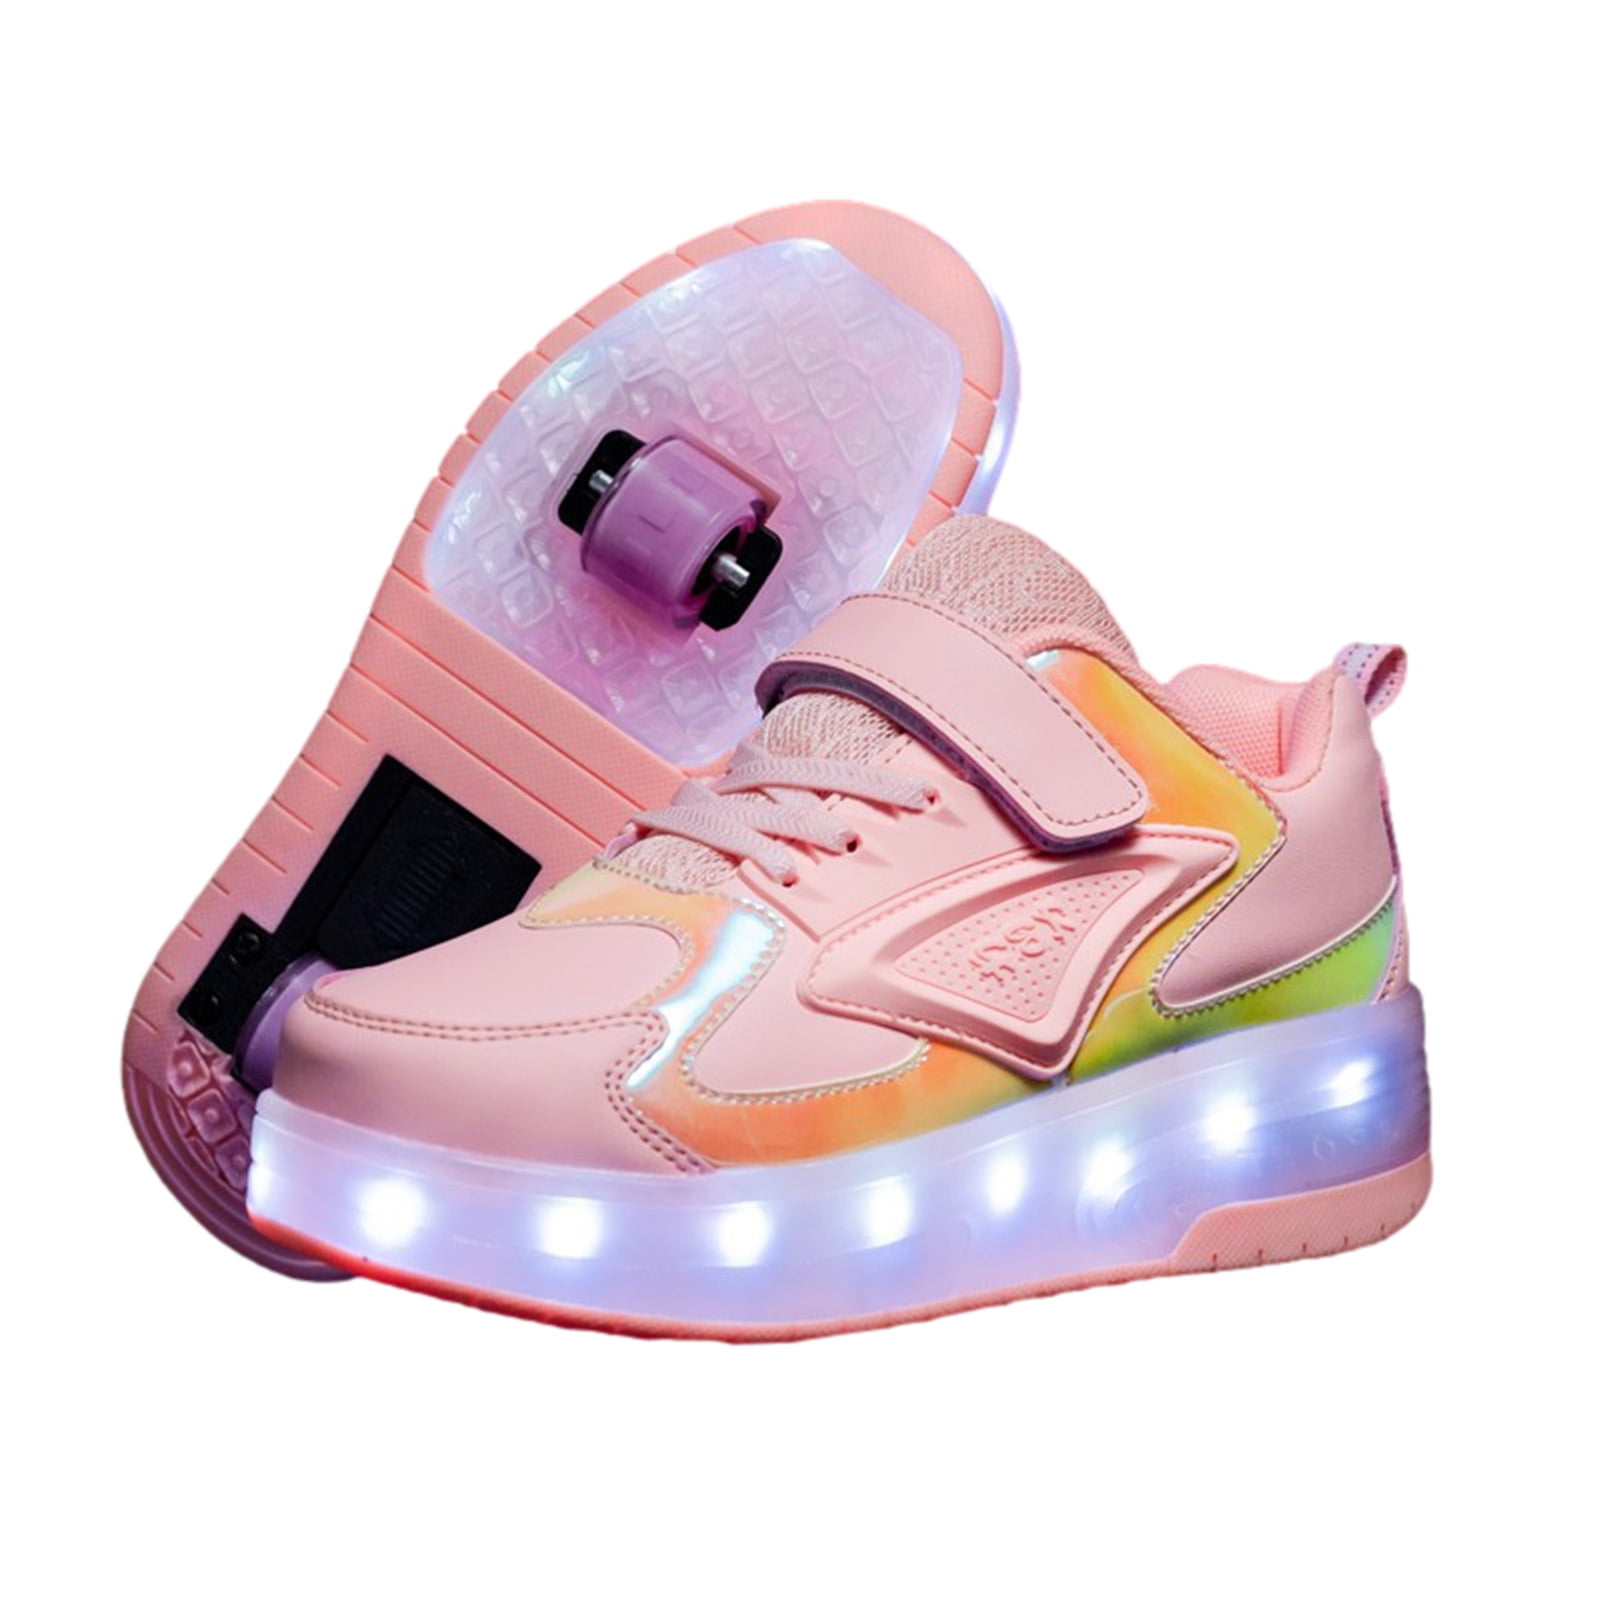 dhh Roller Skate Shoes LED Roller Shoes With USB Charging Adult Flashing Sport Shoes 2-In-1 Multi-Purpose Roller Skates Roller Shoes Kids Roller Skates Shoes,WhiteWheel-36 